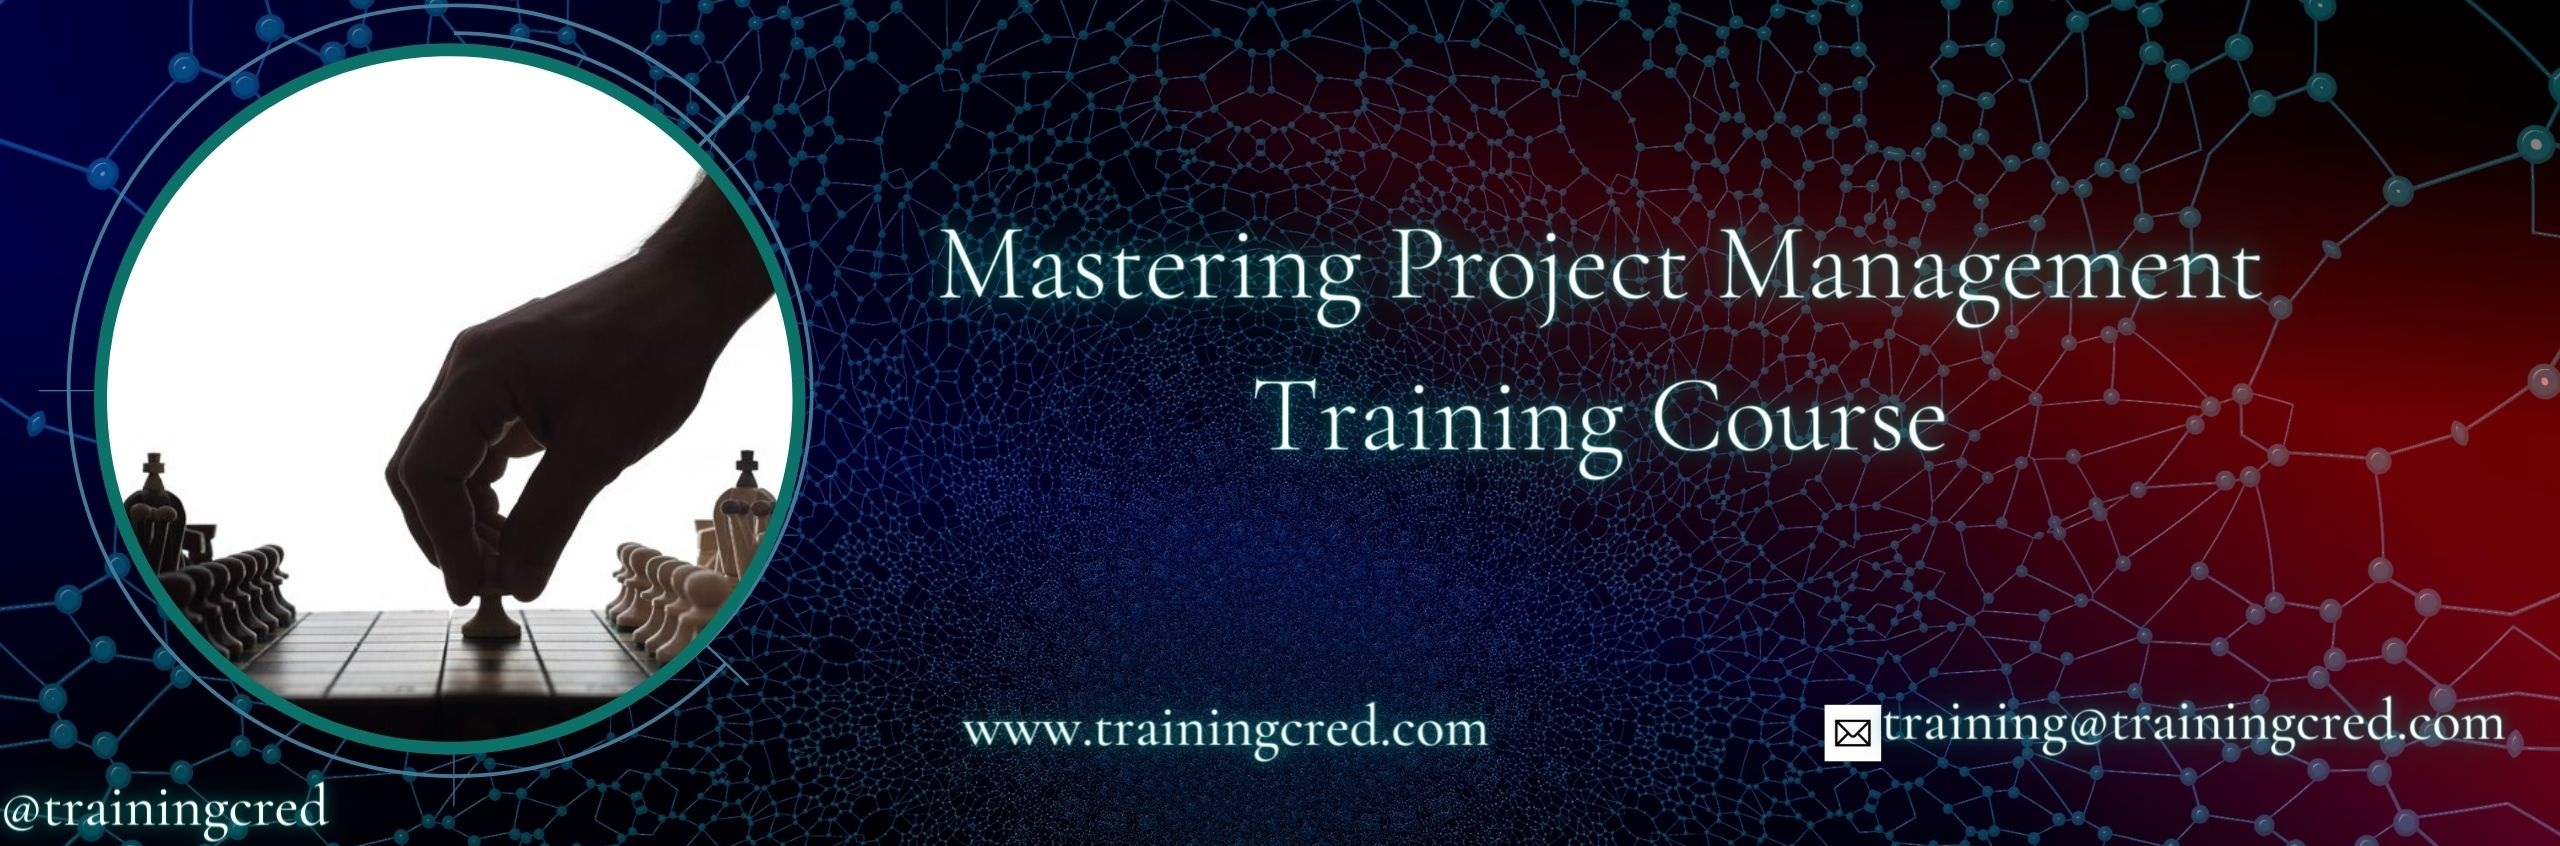 Mastering Project Management Training